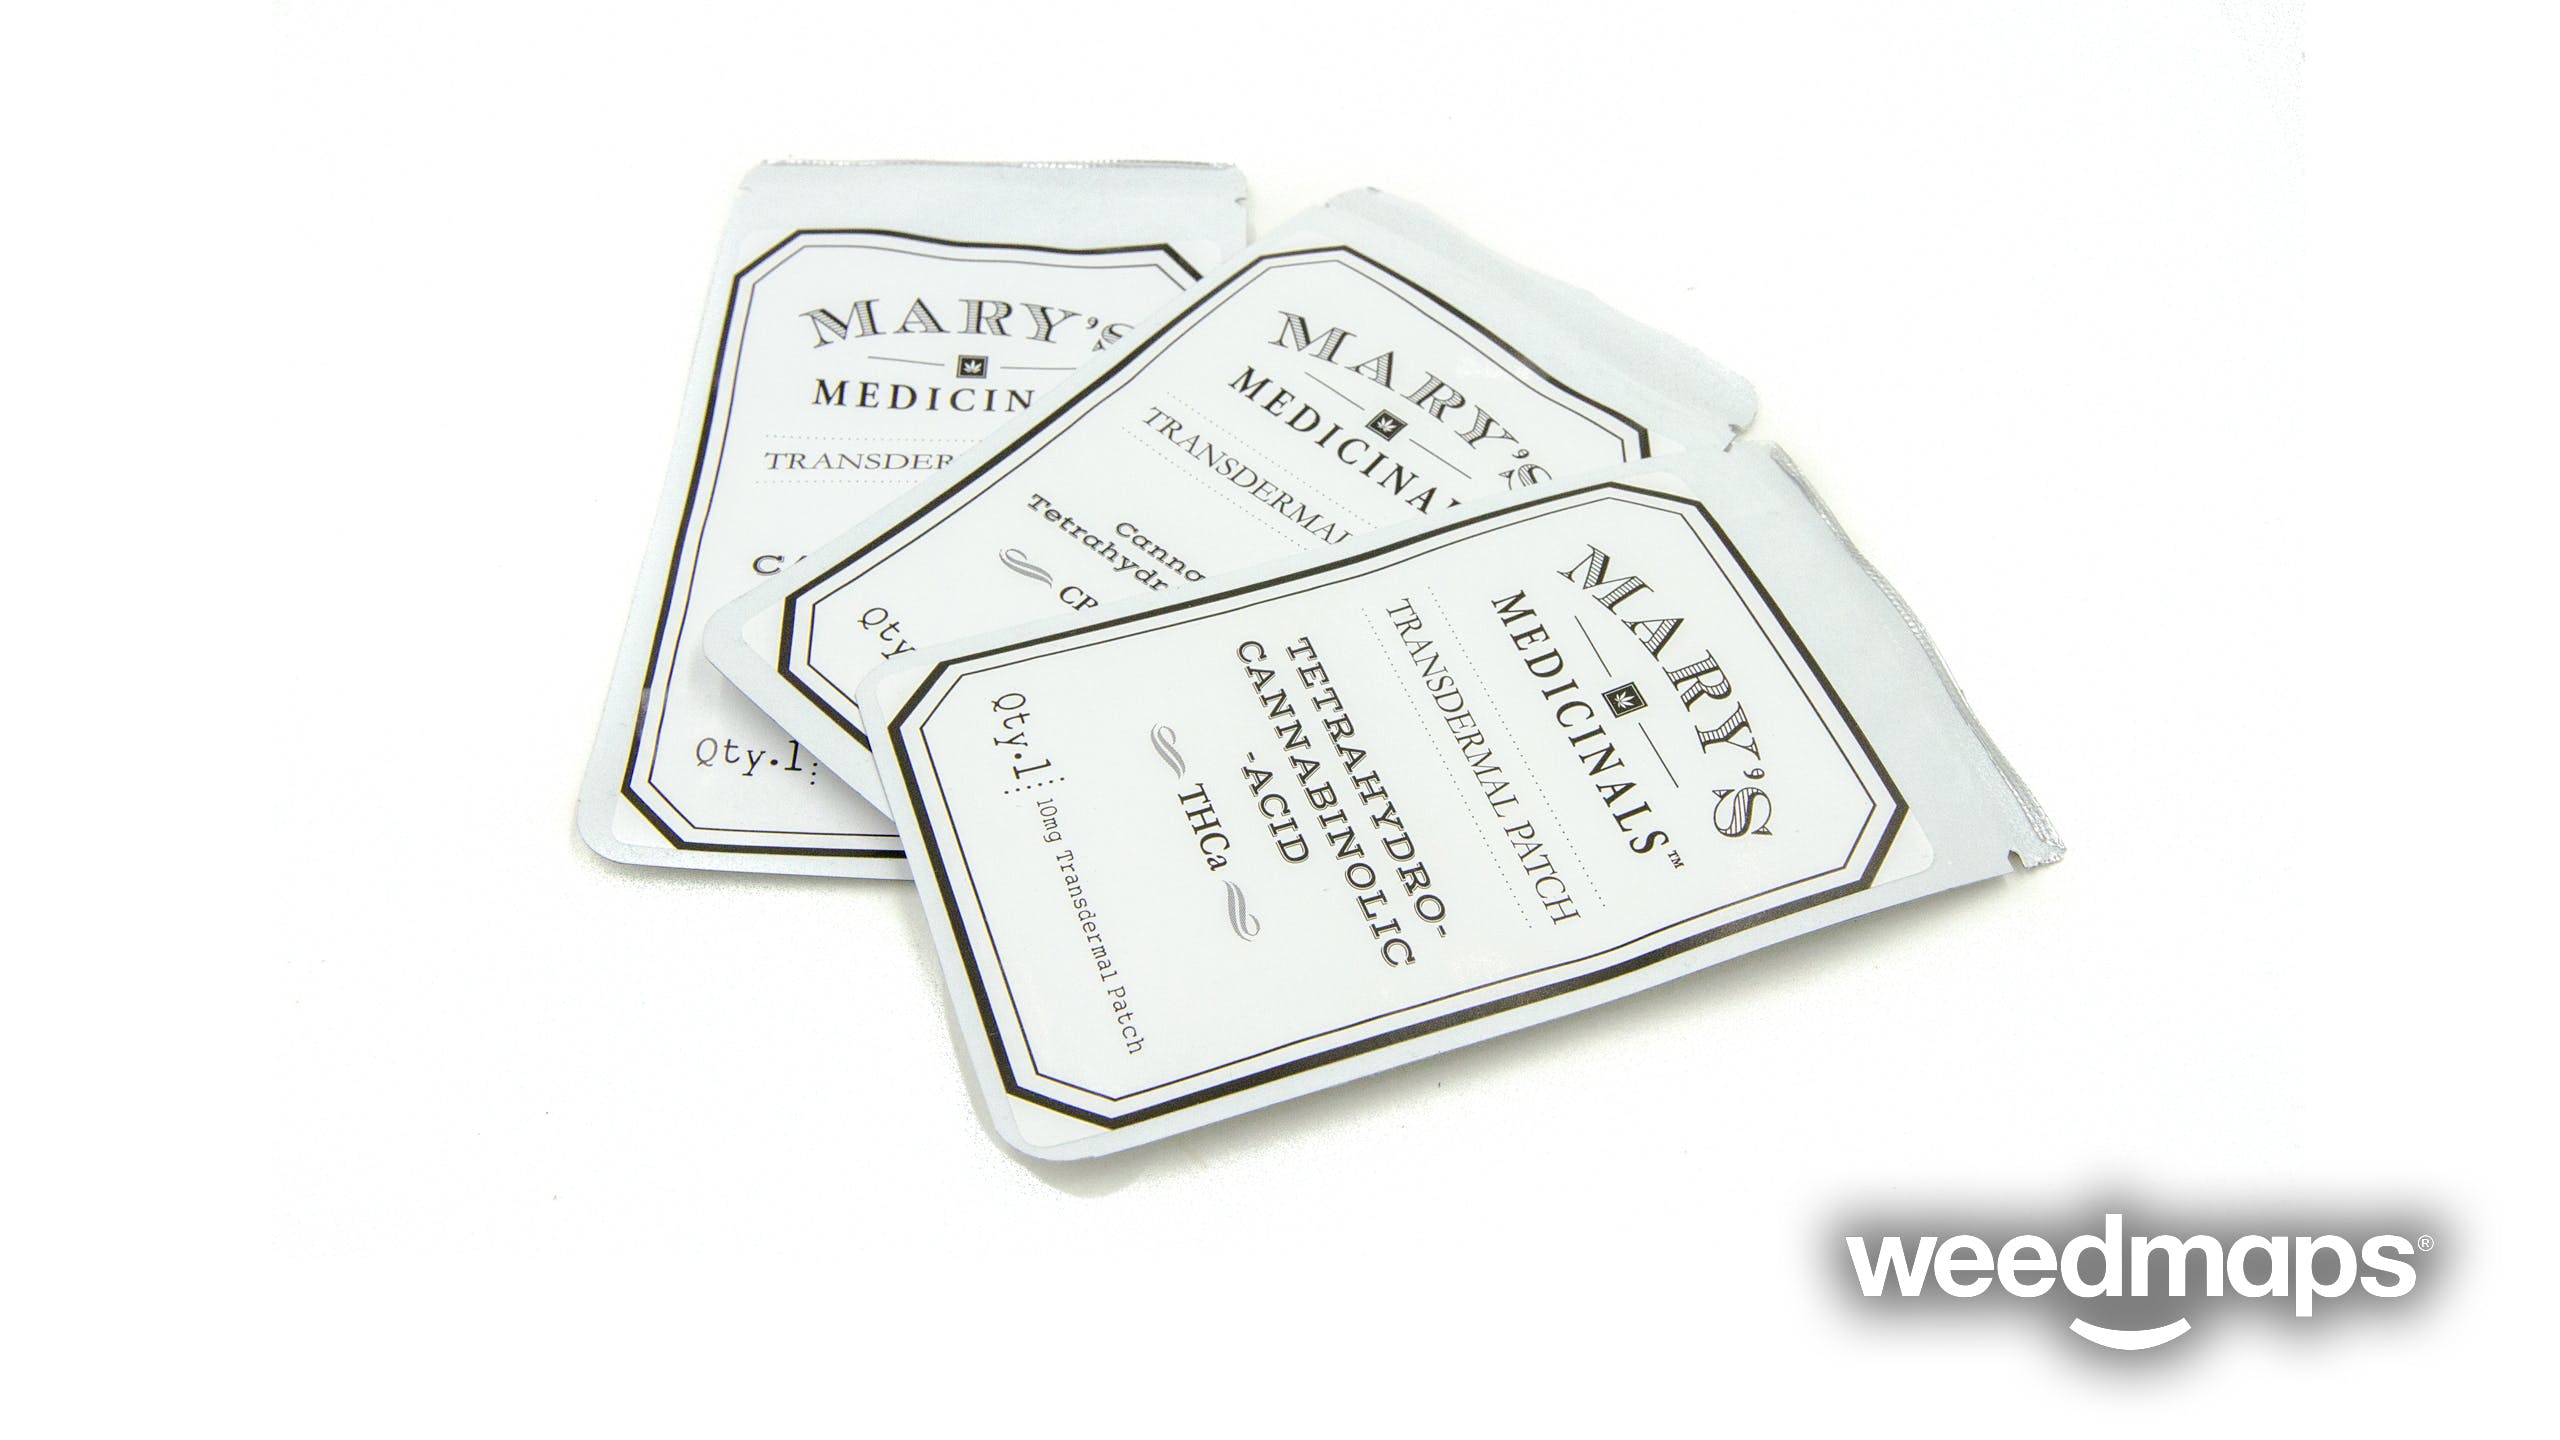 topicals-marys-medicinal-transdermal-patches-thc-sativa